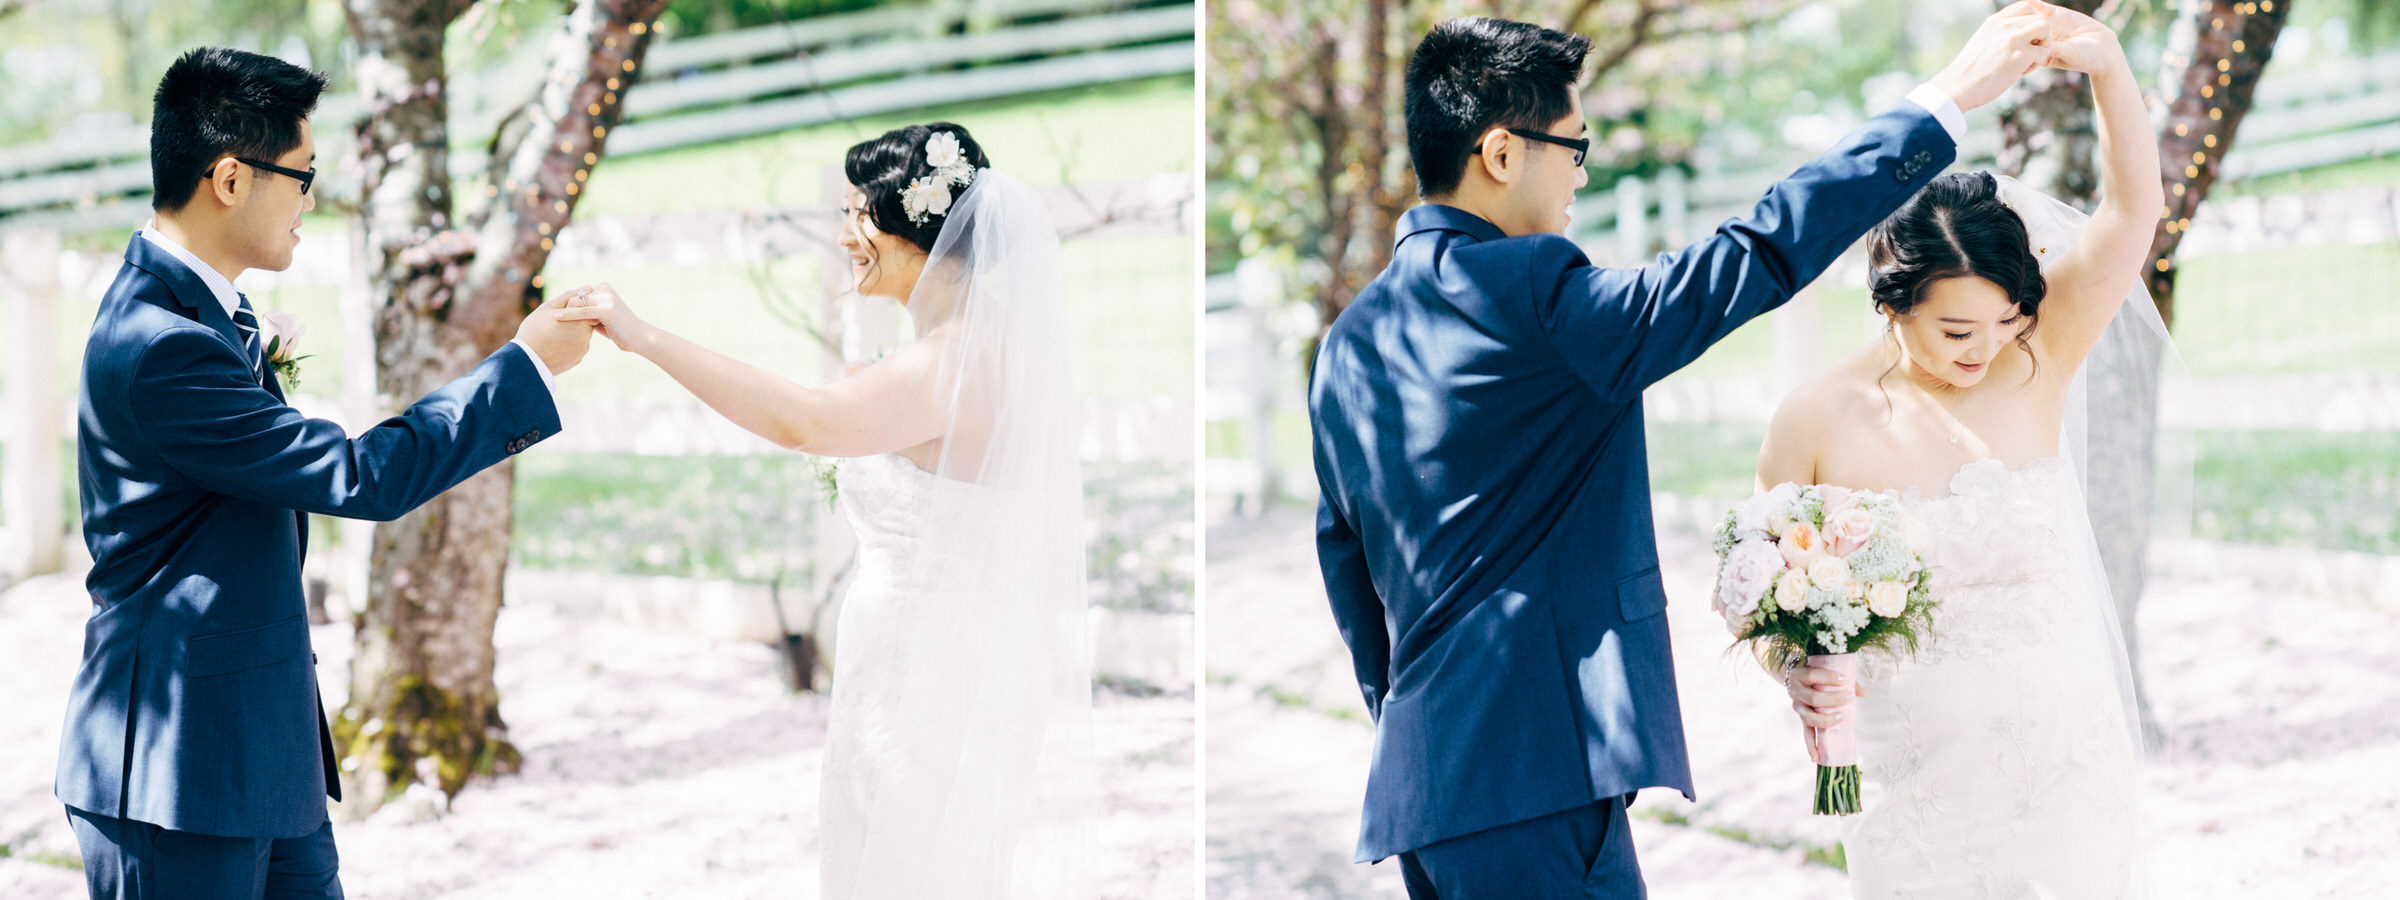 A Spring Wedding at DeLille Cellars: Angela and Sheng (27)